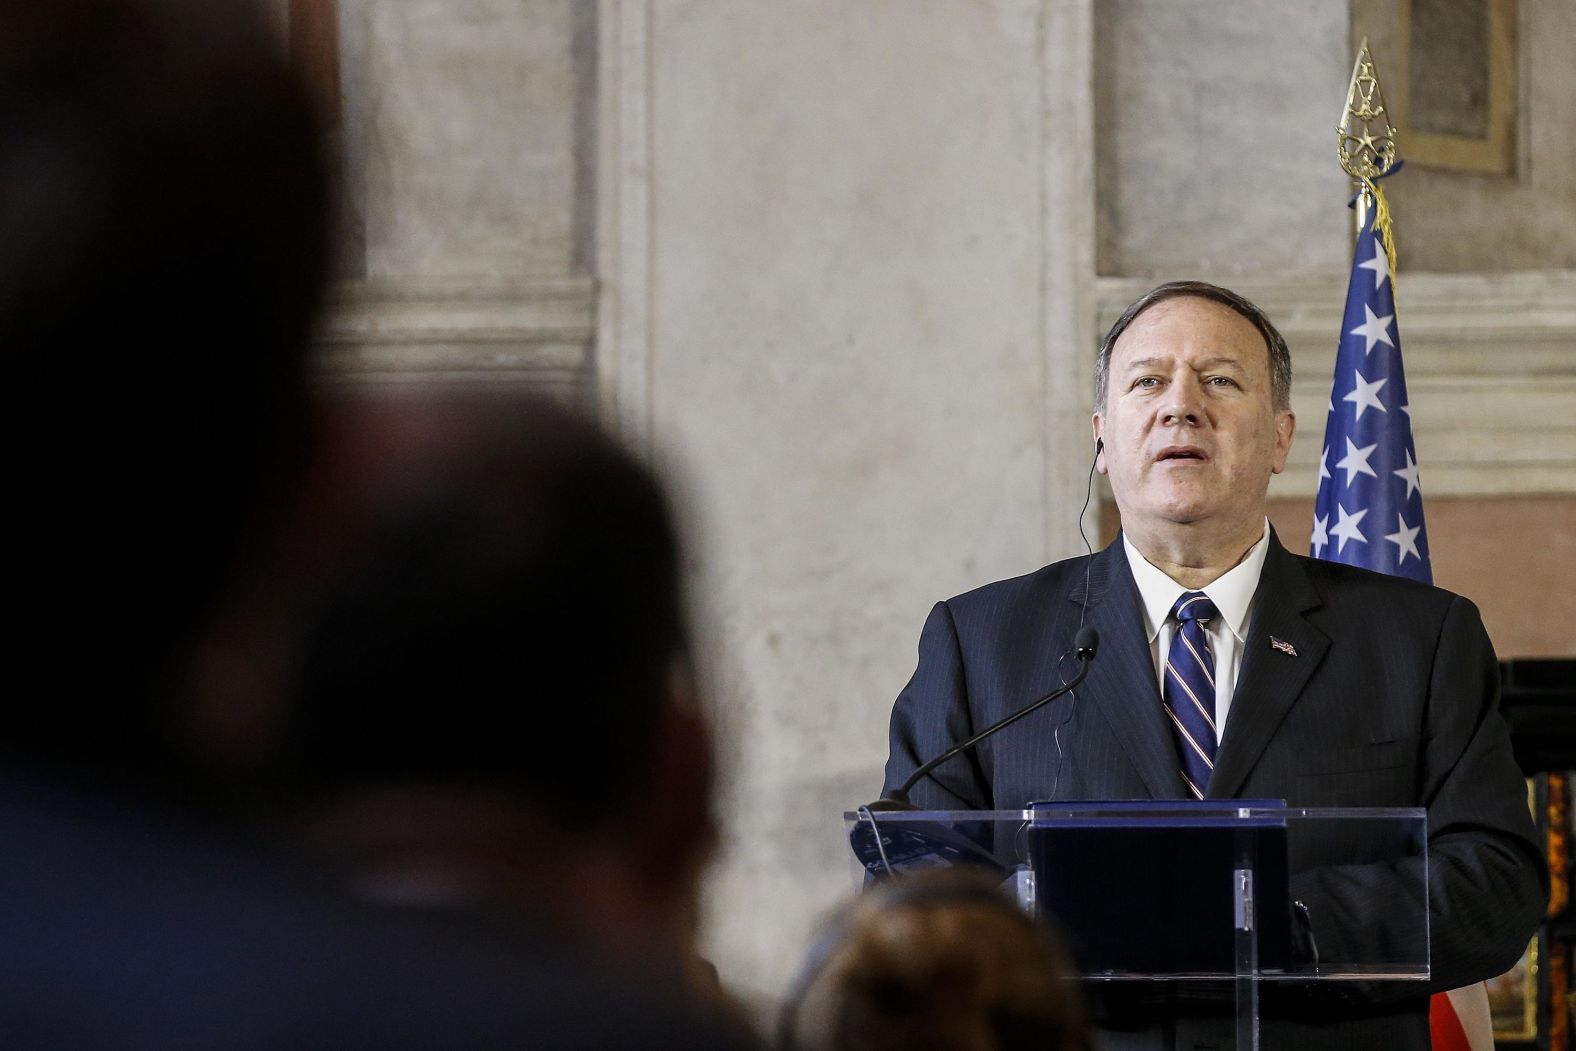 US Secretary of State Mike Pompeo, in Italy visiting Italy's foreign minister, attends a joint news conference in Rome on October 2. Pompeo <a href="https://www.cnn.com/2019/10/02/politics/mike-pompeo-ukraine-call/index.html" target="_blank">confirmed that he was on the July 25 phone call</a> with Trump and Zelensky. Pompeo <a href="https://www.cnn.com/2019/09/27/politics/pompeo-congressional-subpoena-ukraine/index.html" target="_blank">has been subpoenaed</a> by the chairmen of three House committees over his failure to produce documents related to Ukraine.